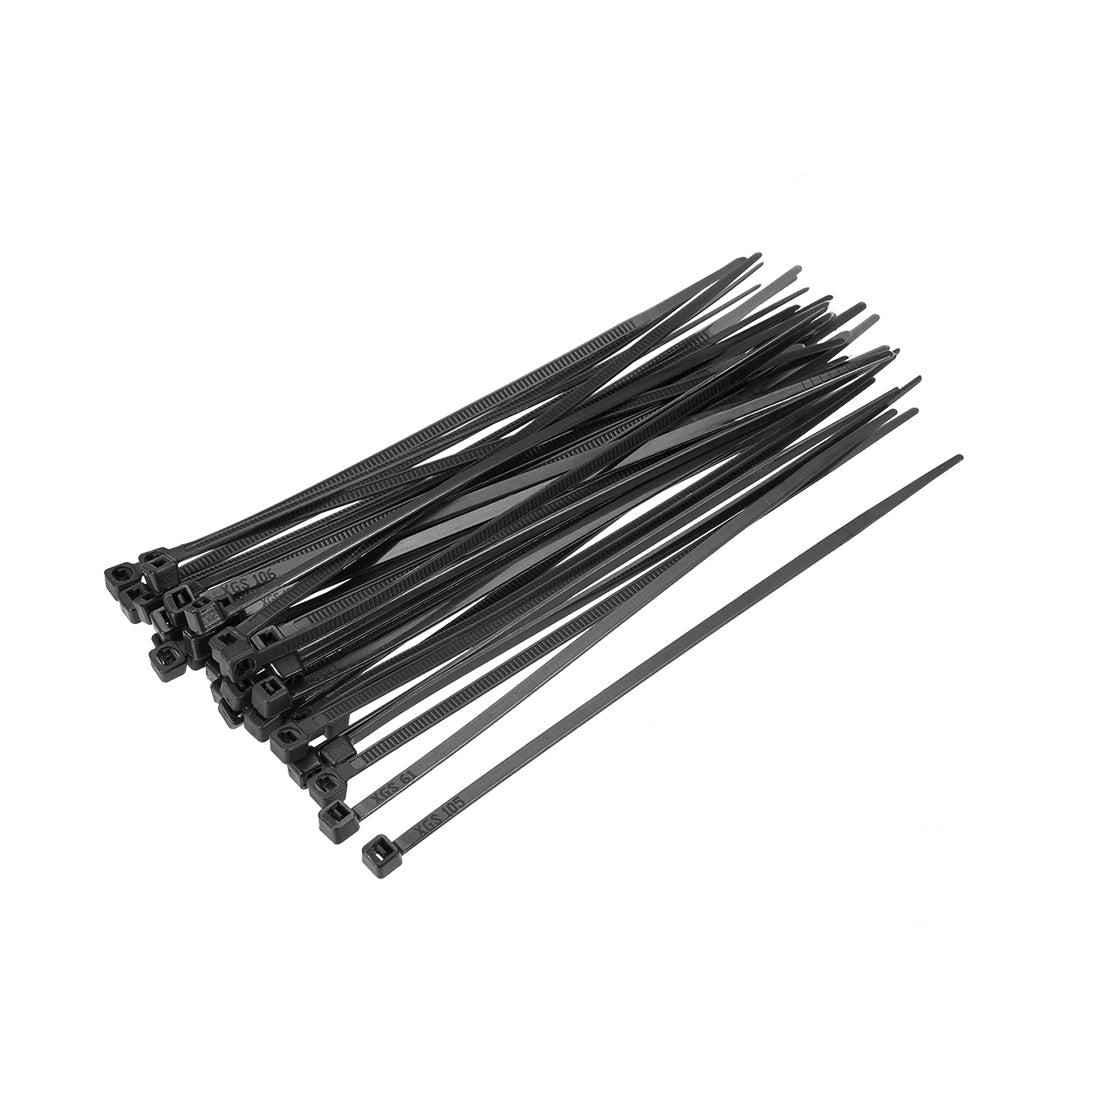 uxcell Uxcell Cable Zip Ties 120mmx3.2mm Self-Locking Nylon Tie Wraps Black 150pcs